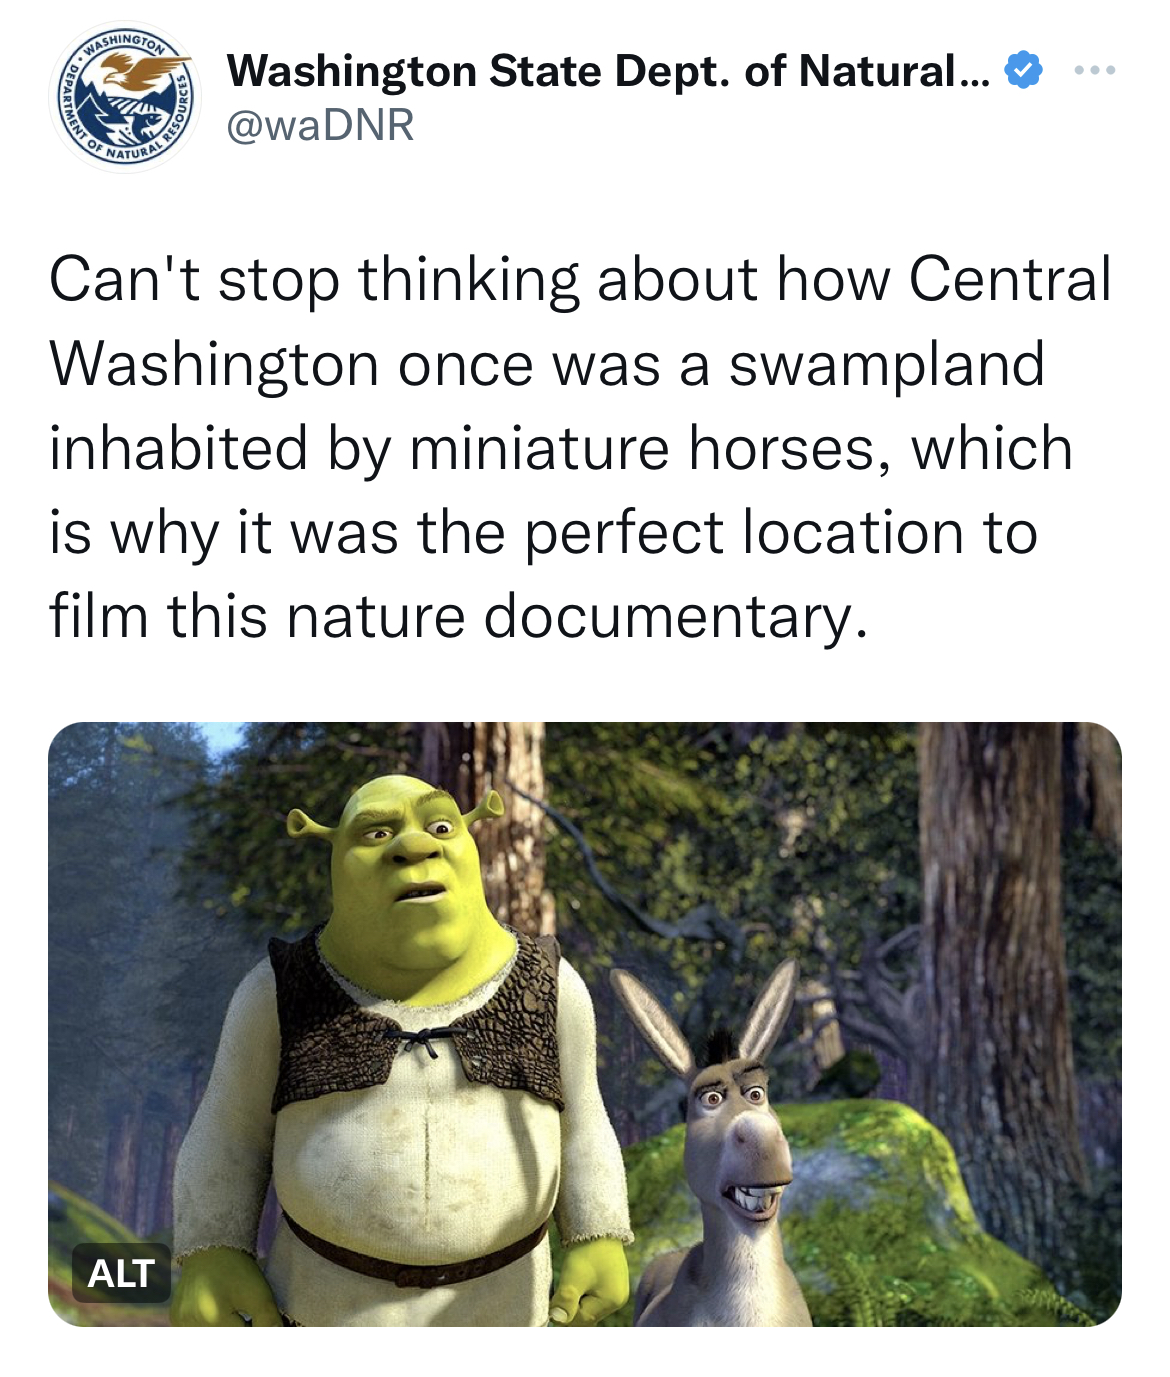 Washington Department of Natural Resources tweets - shrek movie - Aman Washington State Dept. of Natural... Alt www Can't stop thinking about how Central Washington once was a swampland inhabited by miniature horses, which is why it was the perfect locati